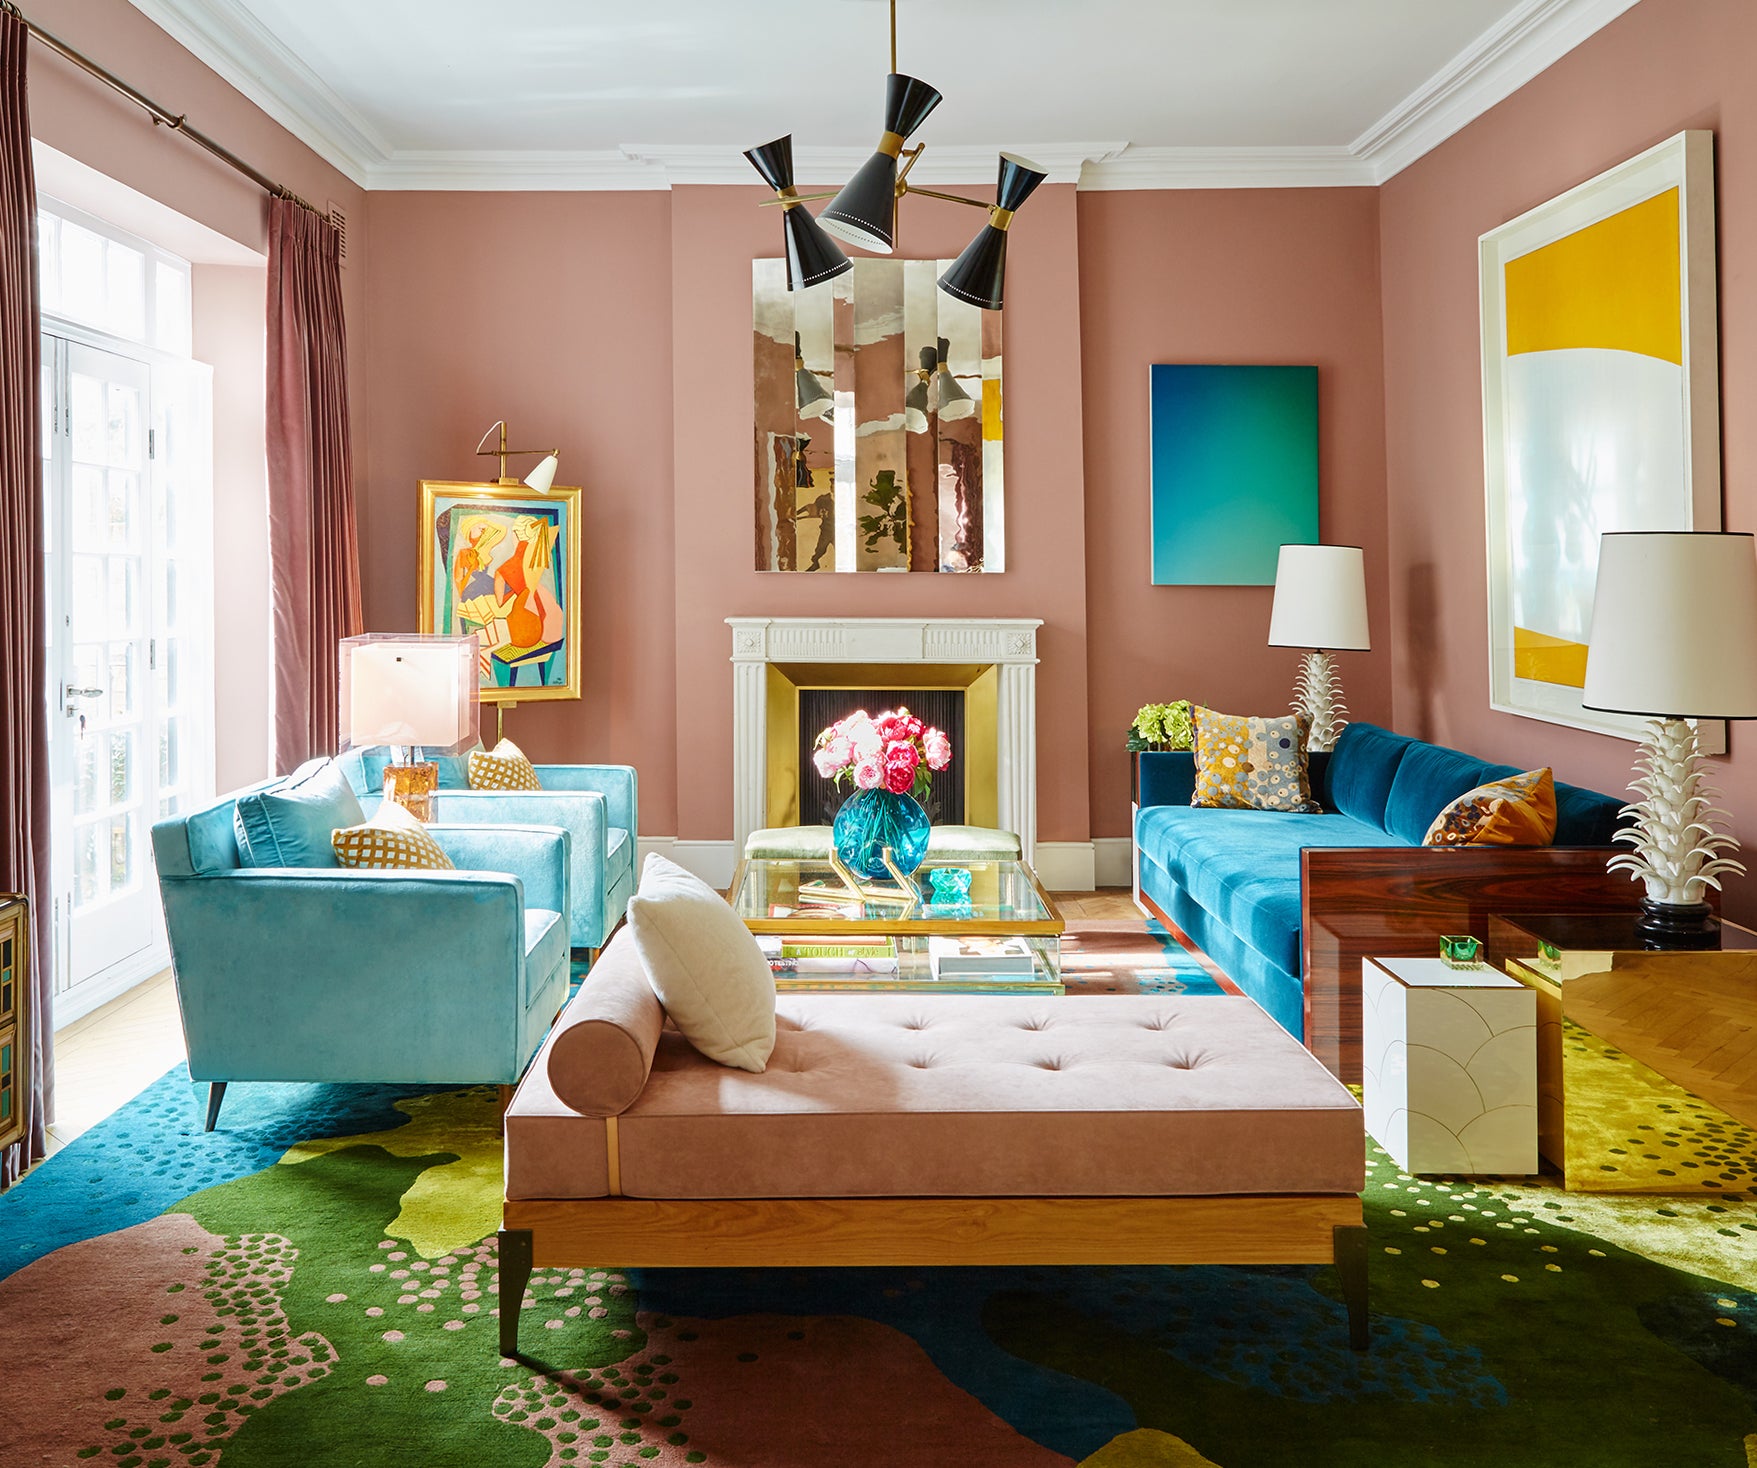 Fun Design Ideas For Adding Color Into Your Home   Pinot's Palette